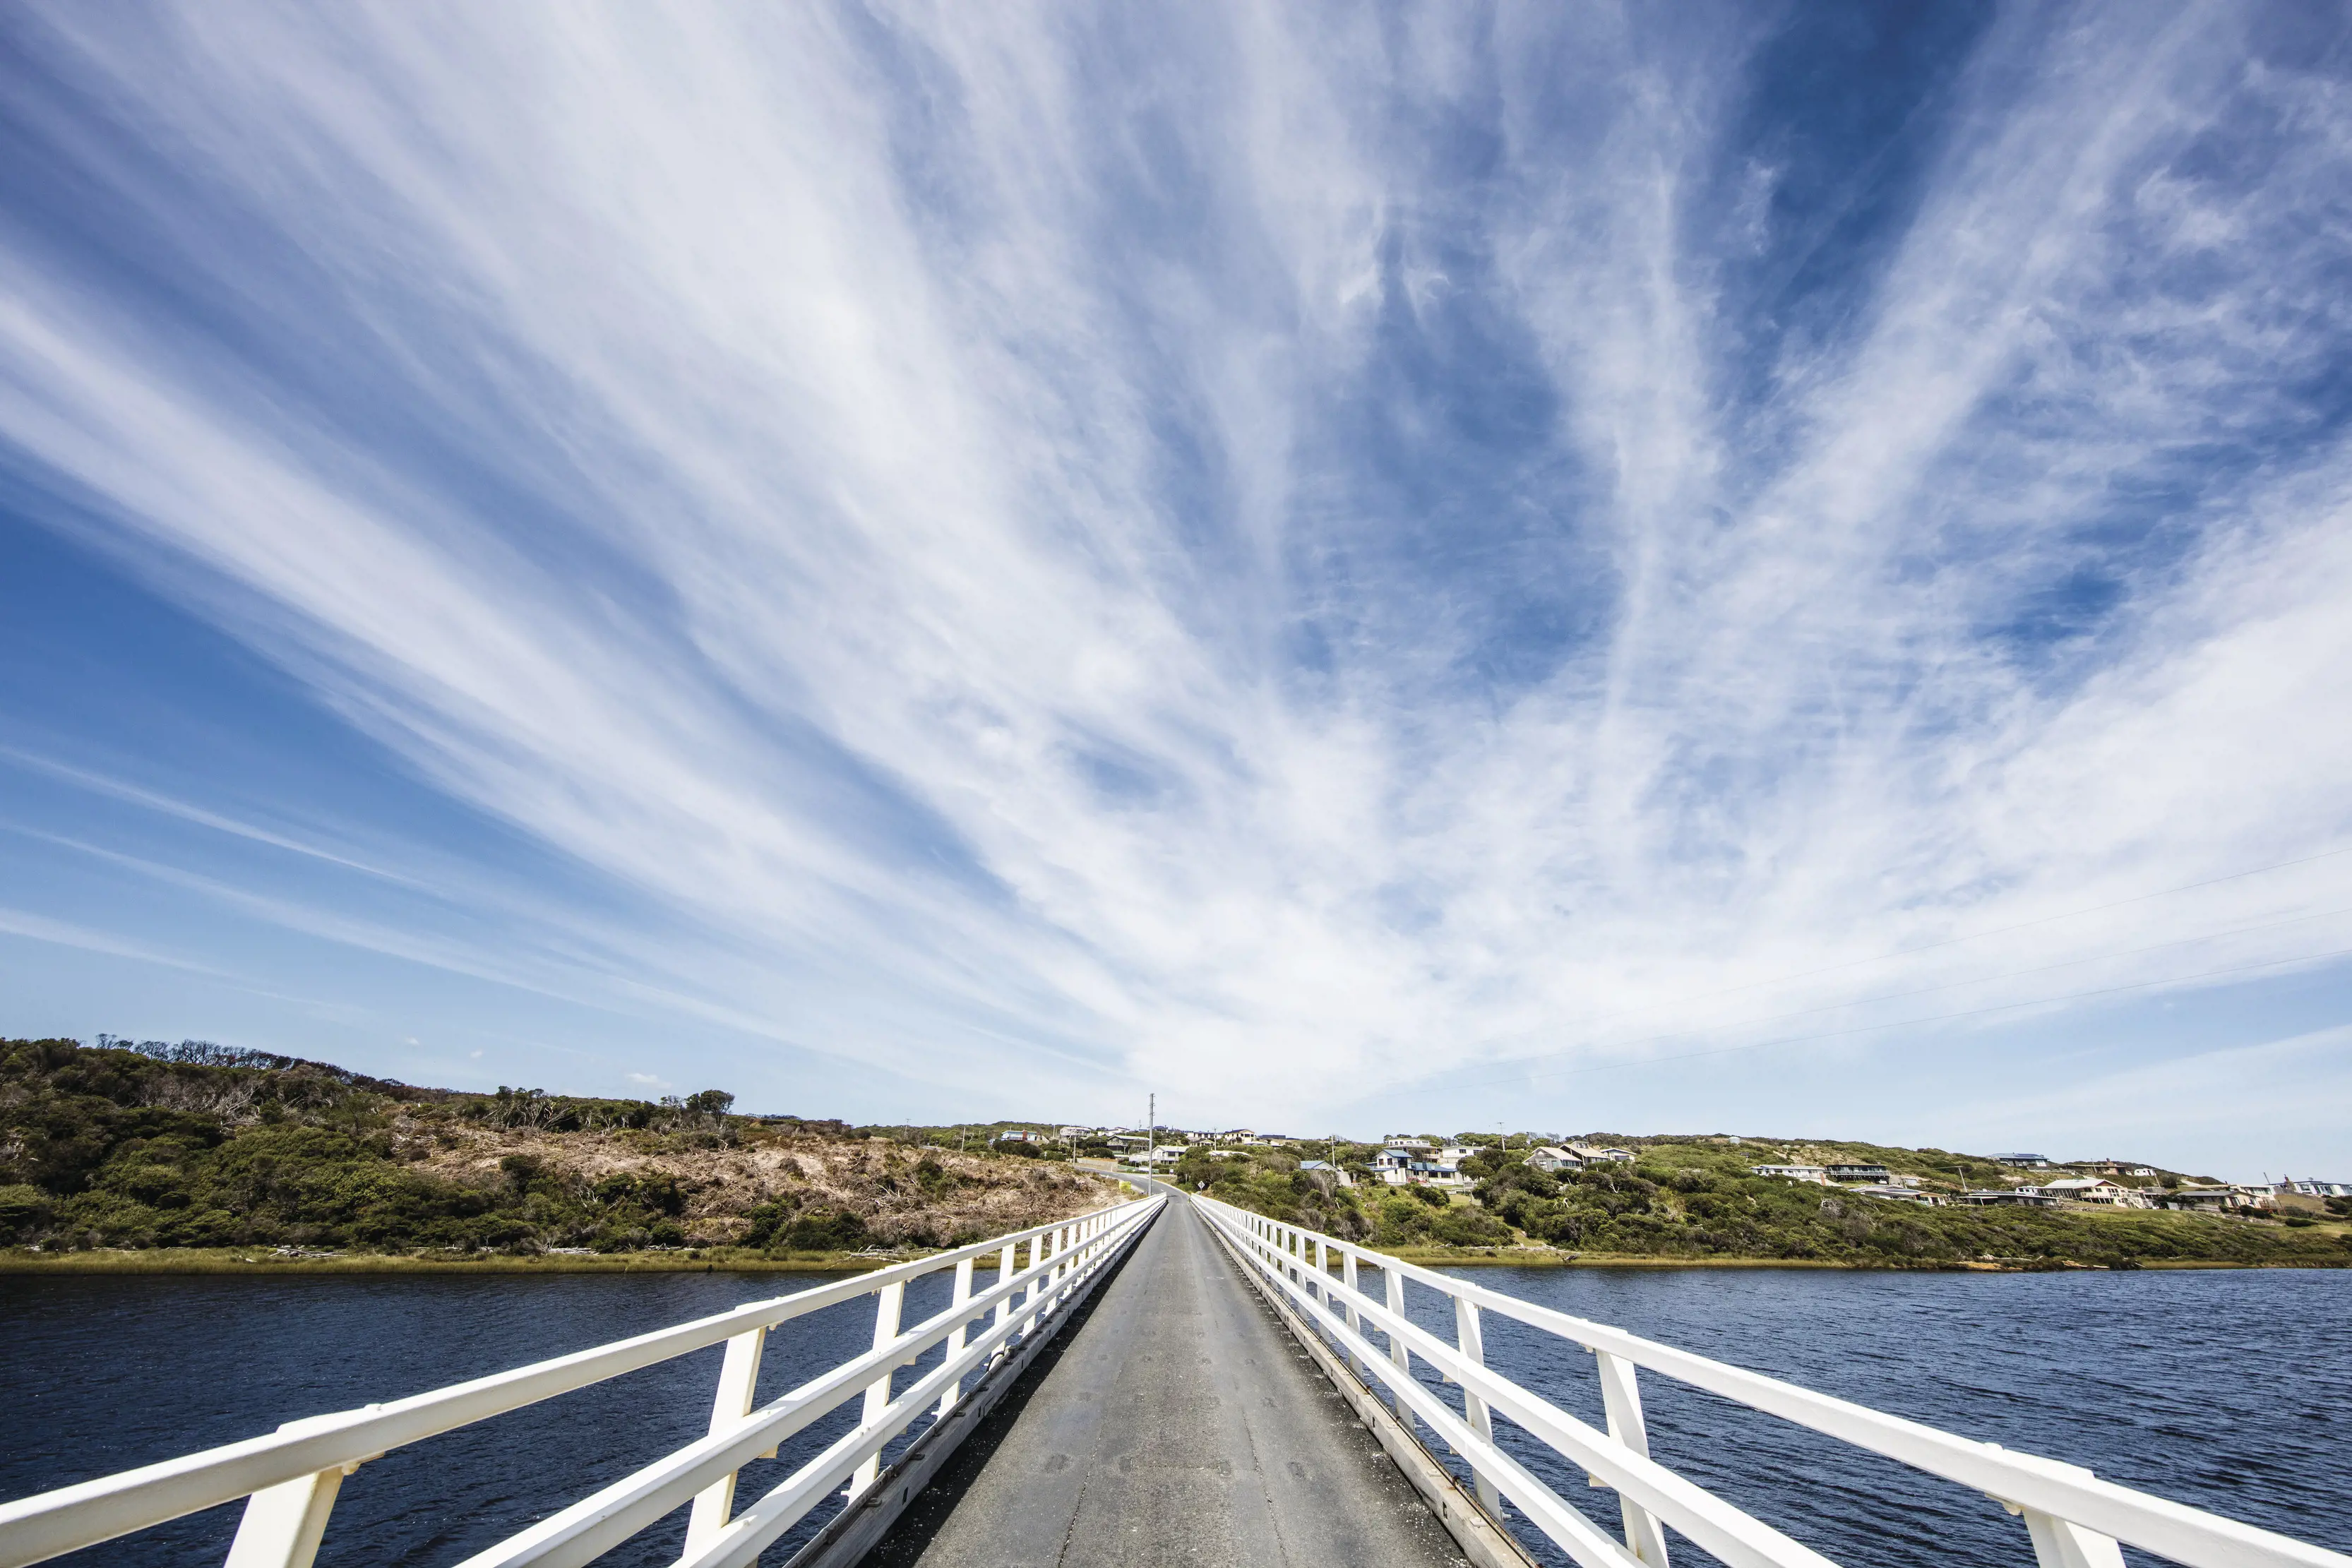 A wide angle image captured on the Arthur River Bridge, captured on a sunny day.